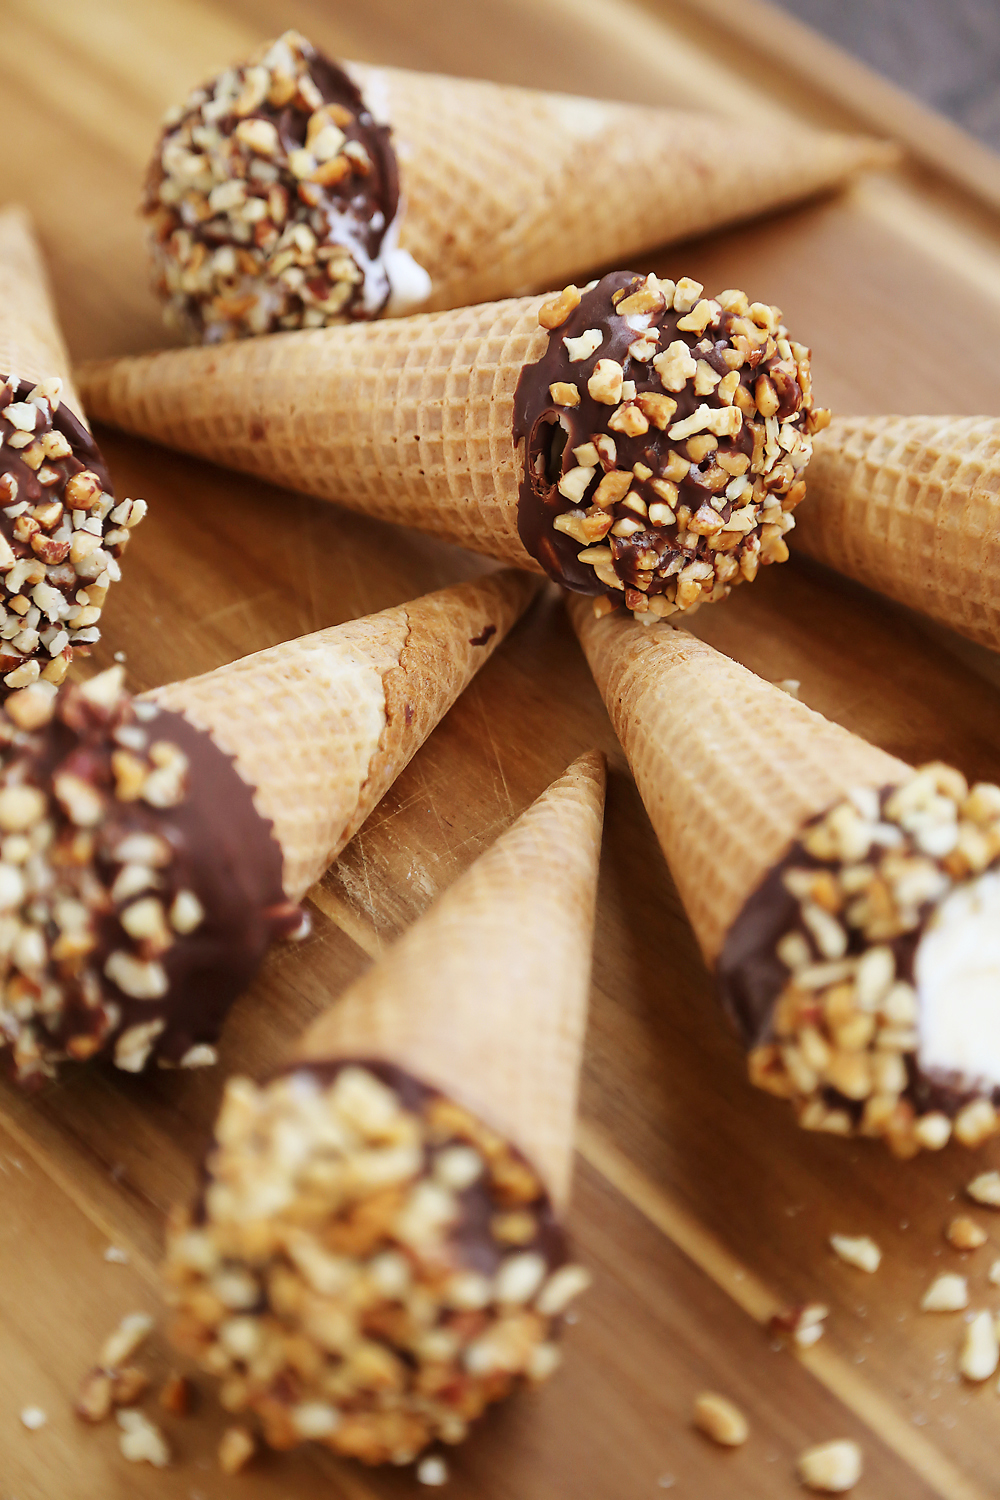 Homemade Vanilla Drumstick Ice Cream Cones – Everyone's favorite frozen treat made at home! These creamy, crisp ice cream cones taste 100x better than store bought. Thecomfortofcooking.com